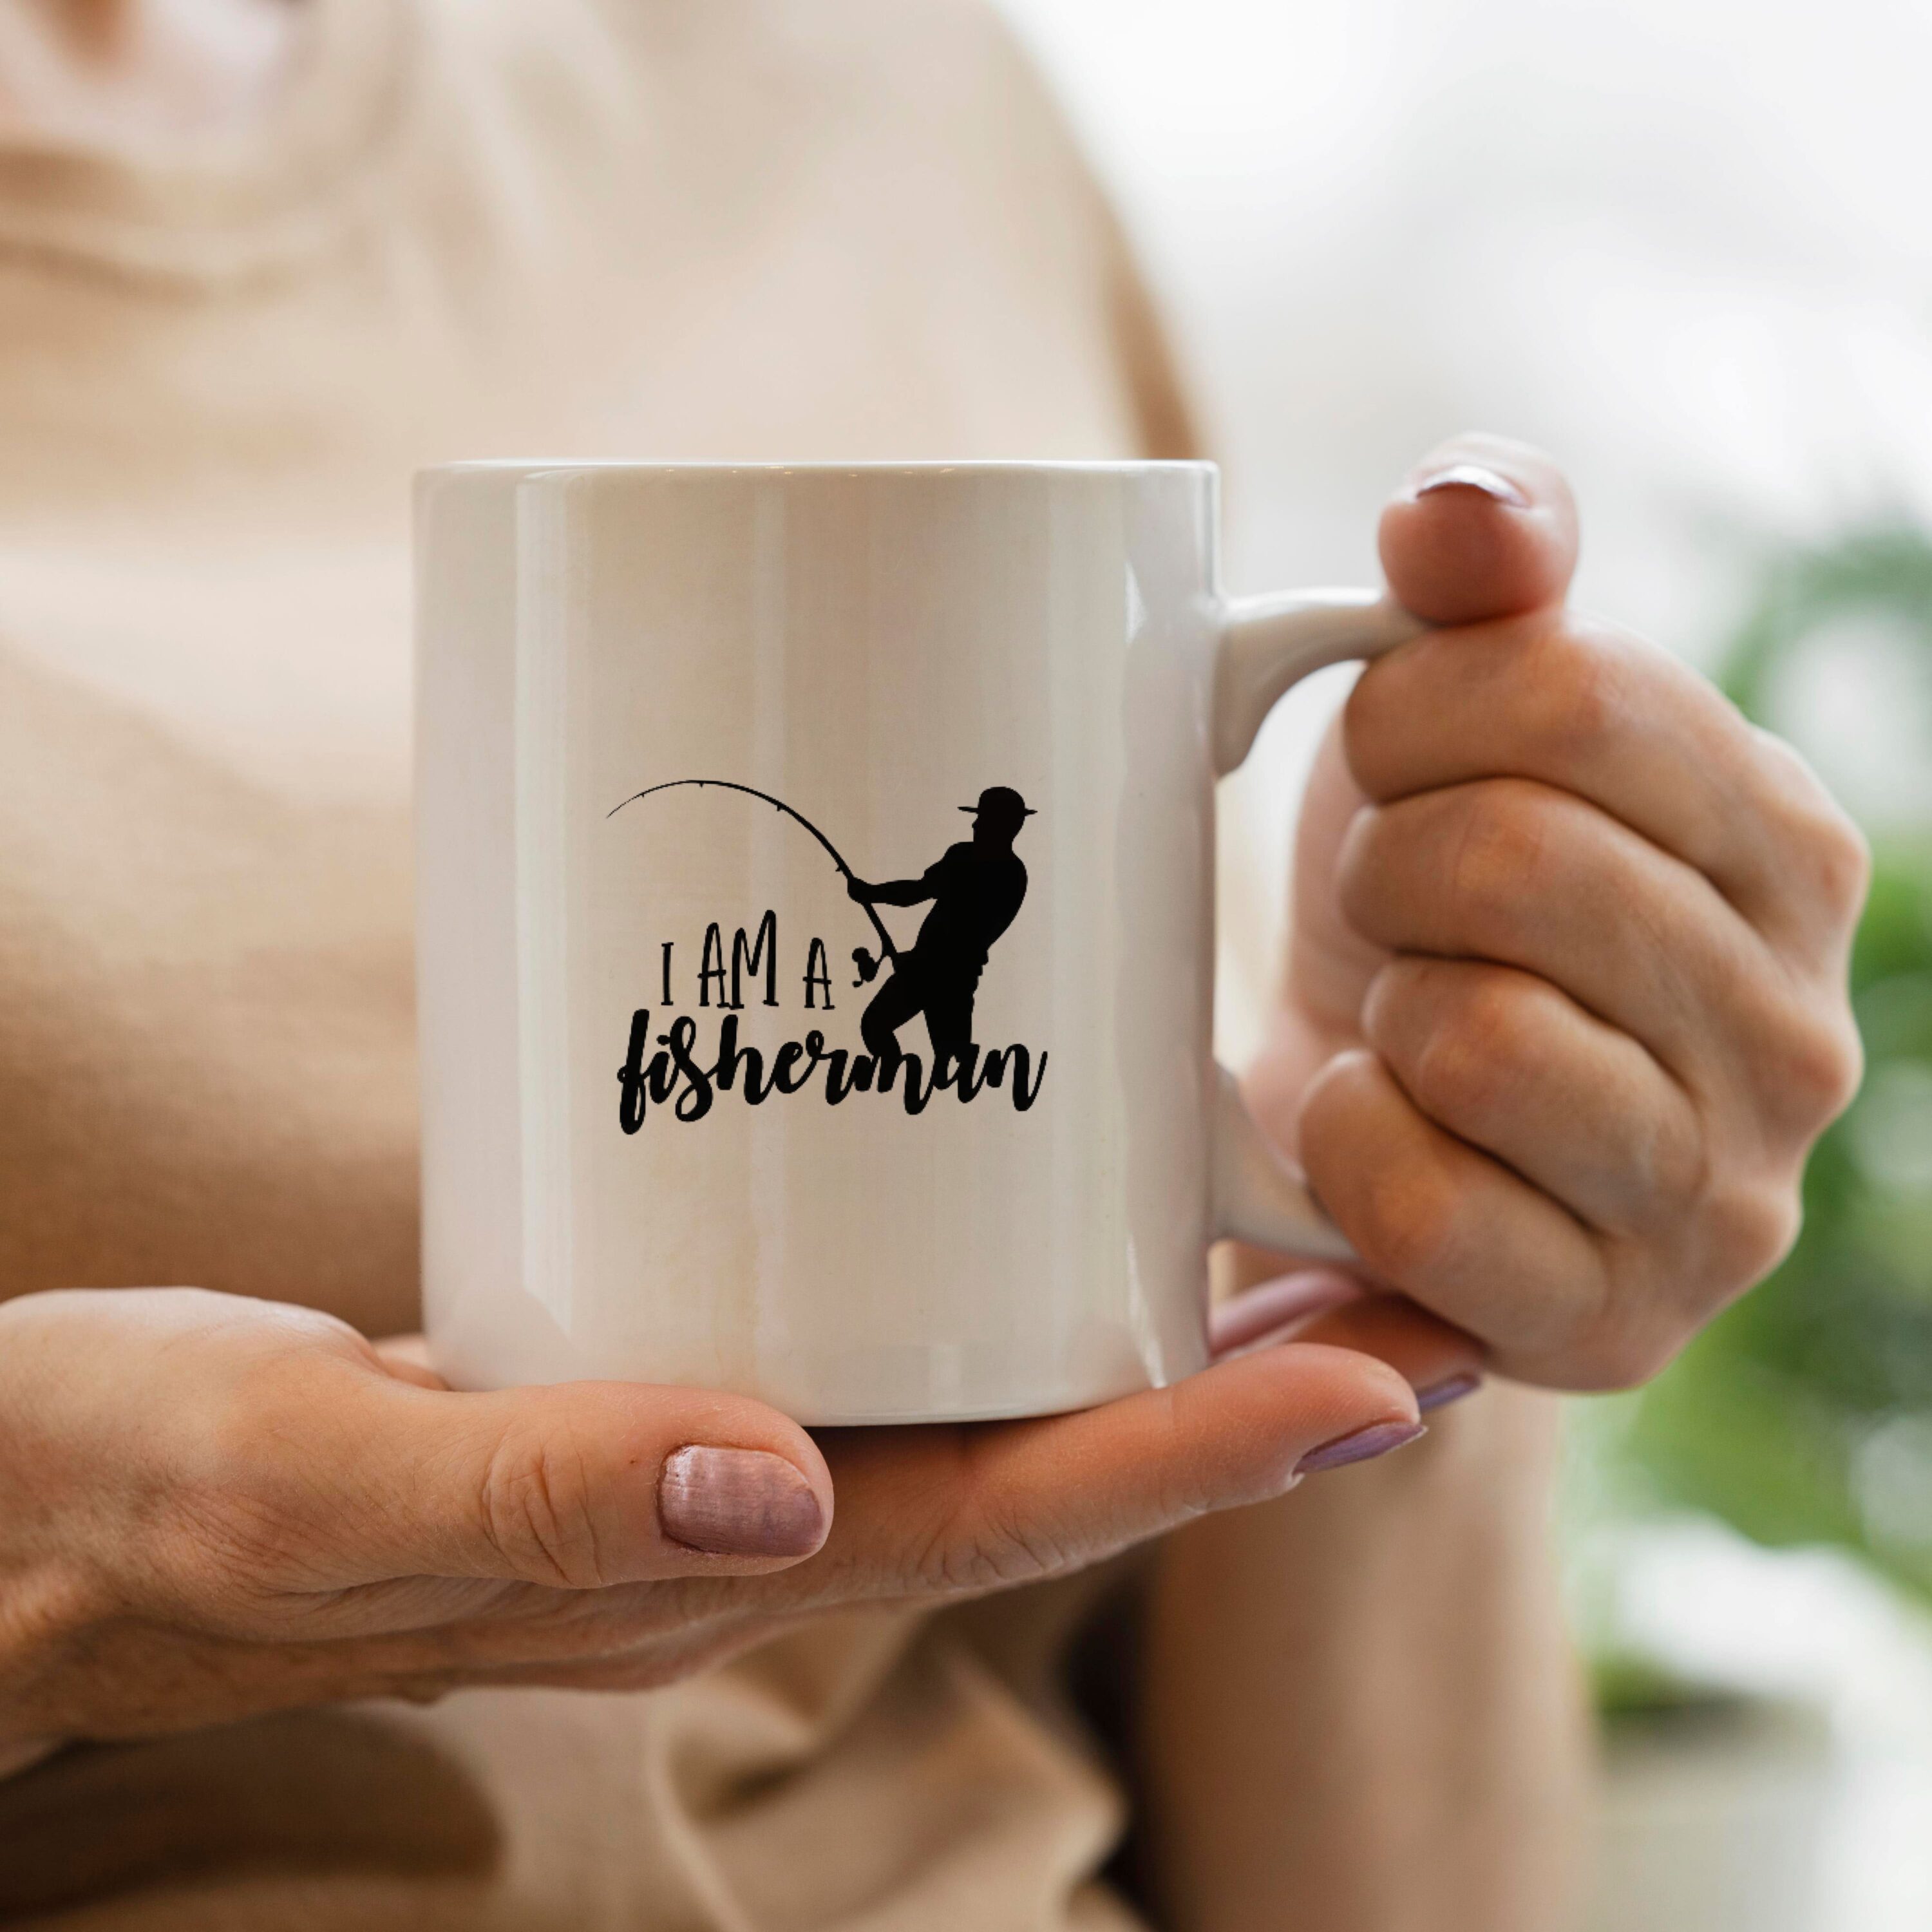 Fishing image for a cup.